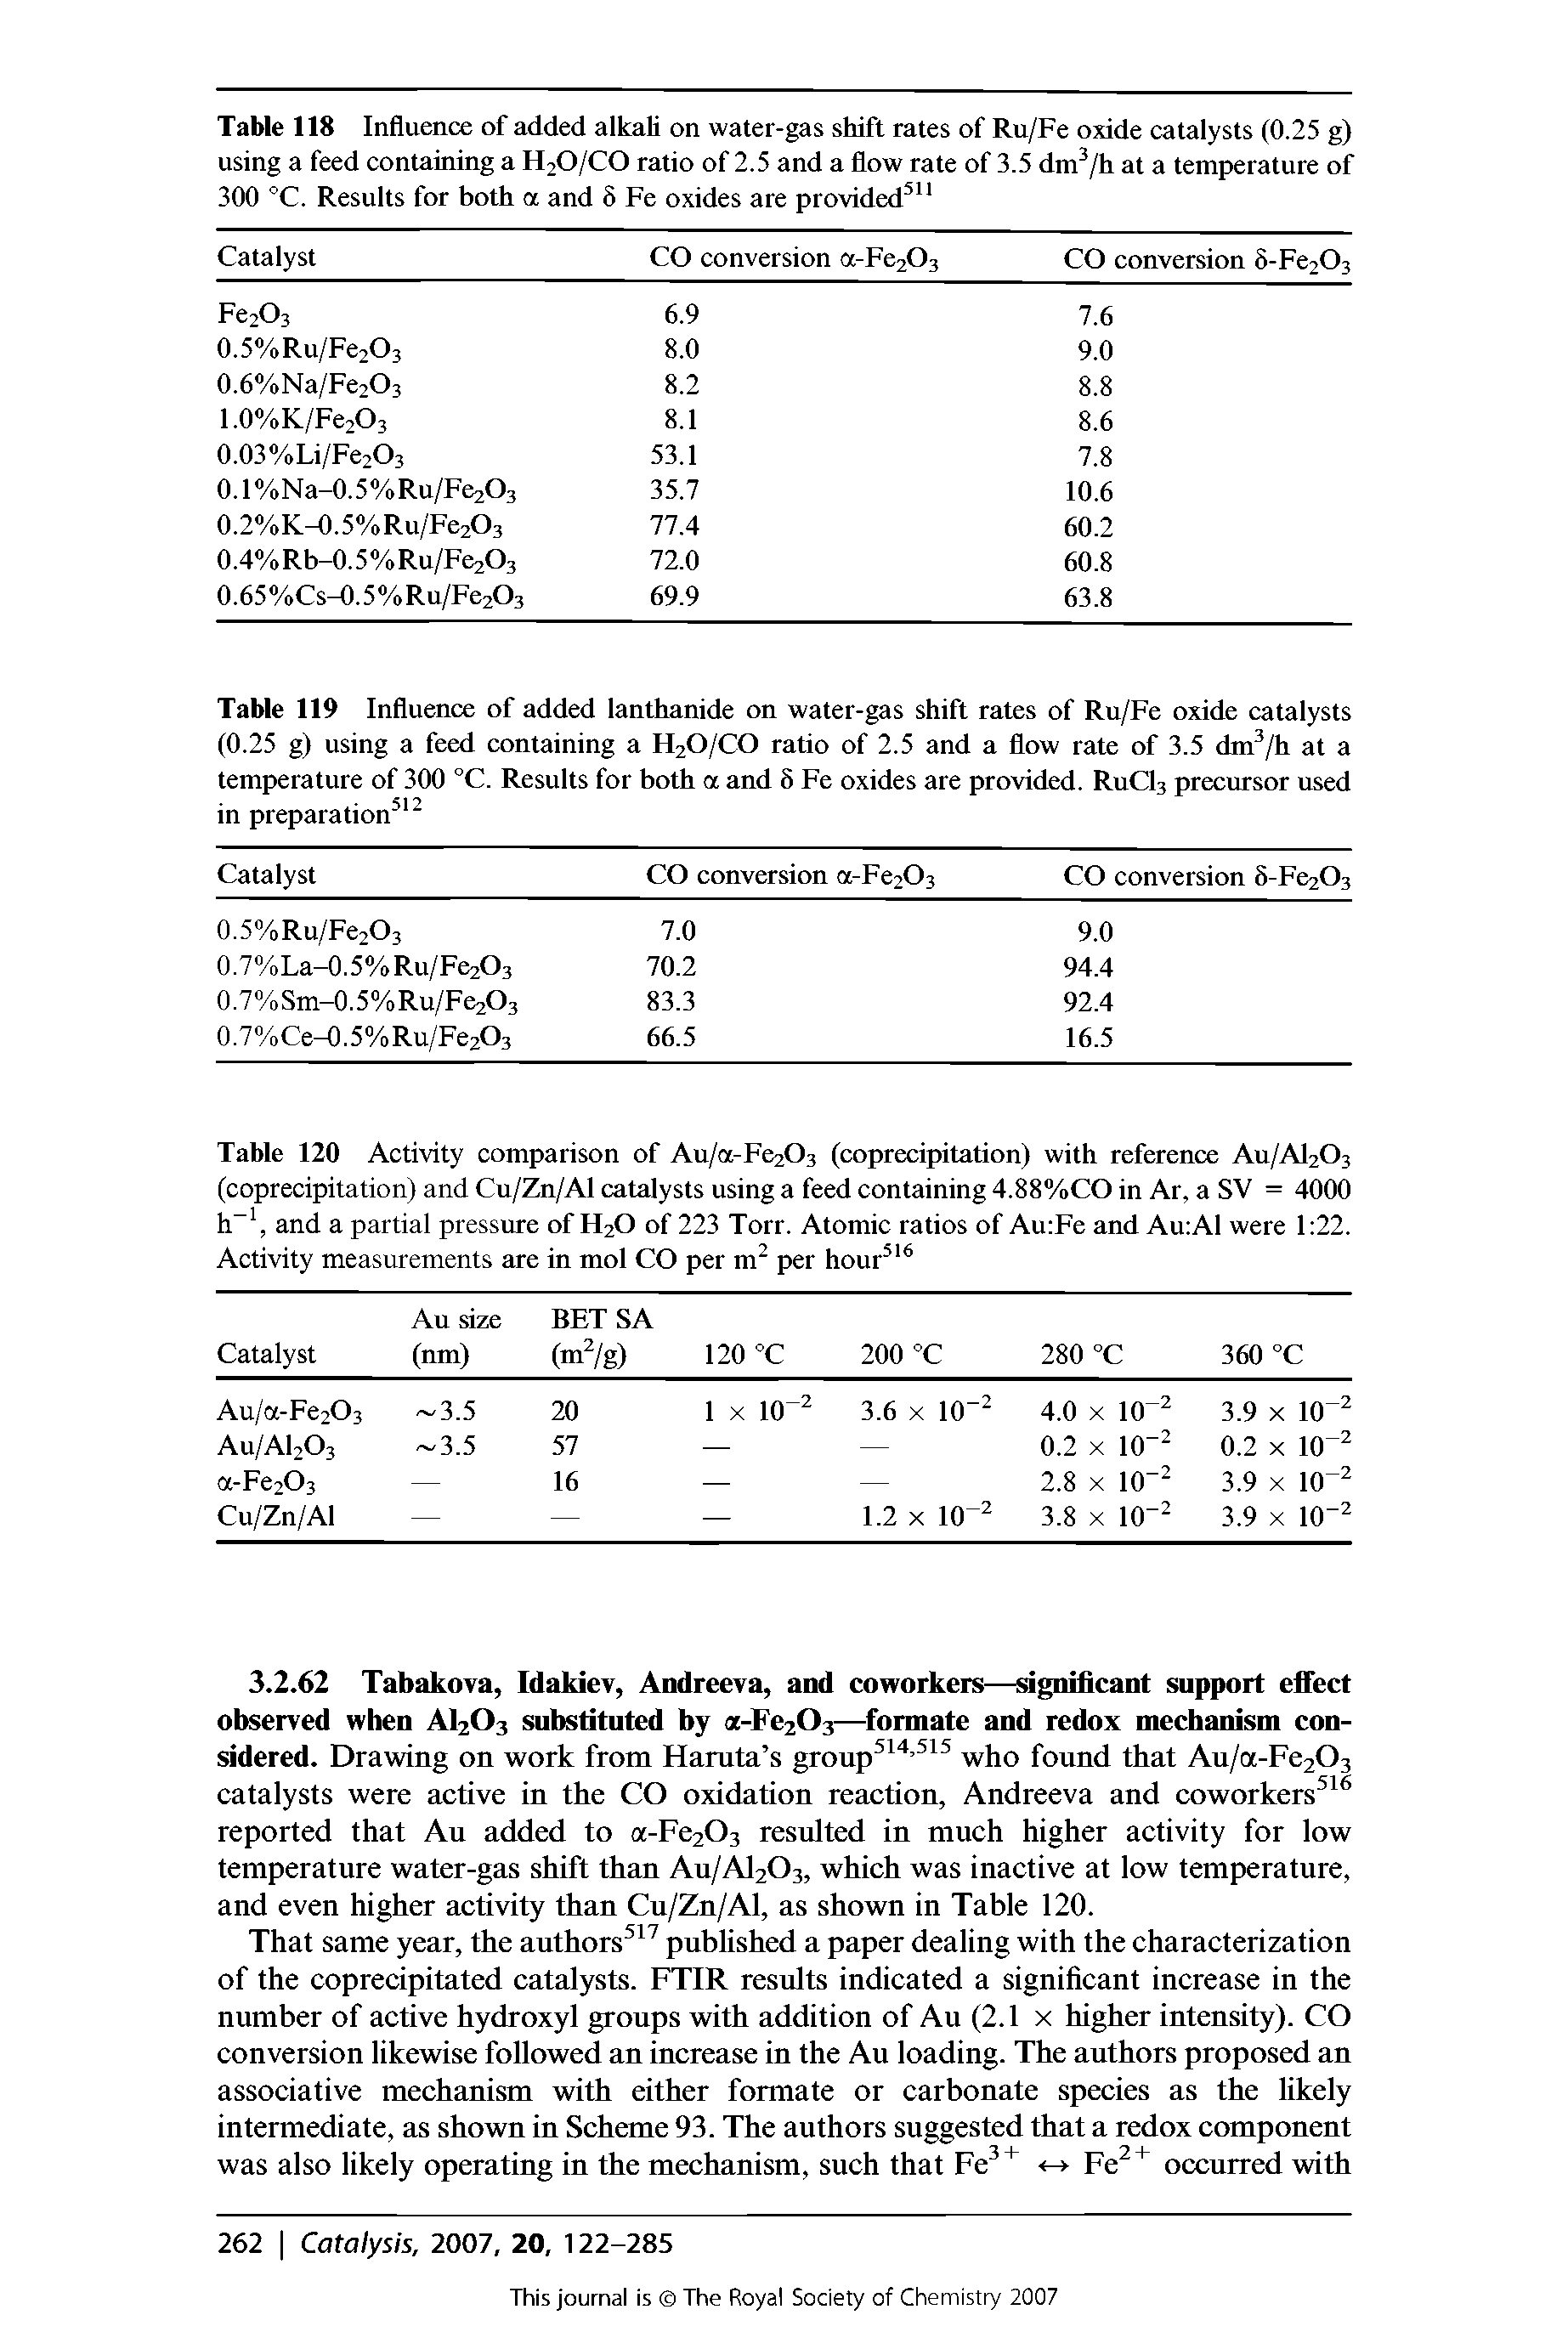 Table 120 Activity comparison of Au/a-Fe203 (coprecipitation) with reference Au/A1203 (coprecipitation) and Cu/Zn/Al catalysts using a feed containing 4.88%CO in Ar, a SV = 4000 h 1, and a partial pressure of H20 of 223 Torr. Atomic ratios of Au Fe and Au Al were 1 22. Activity measurements are in mol CO per m2 per hour516...